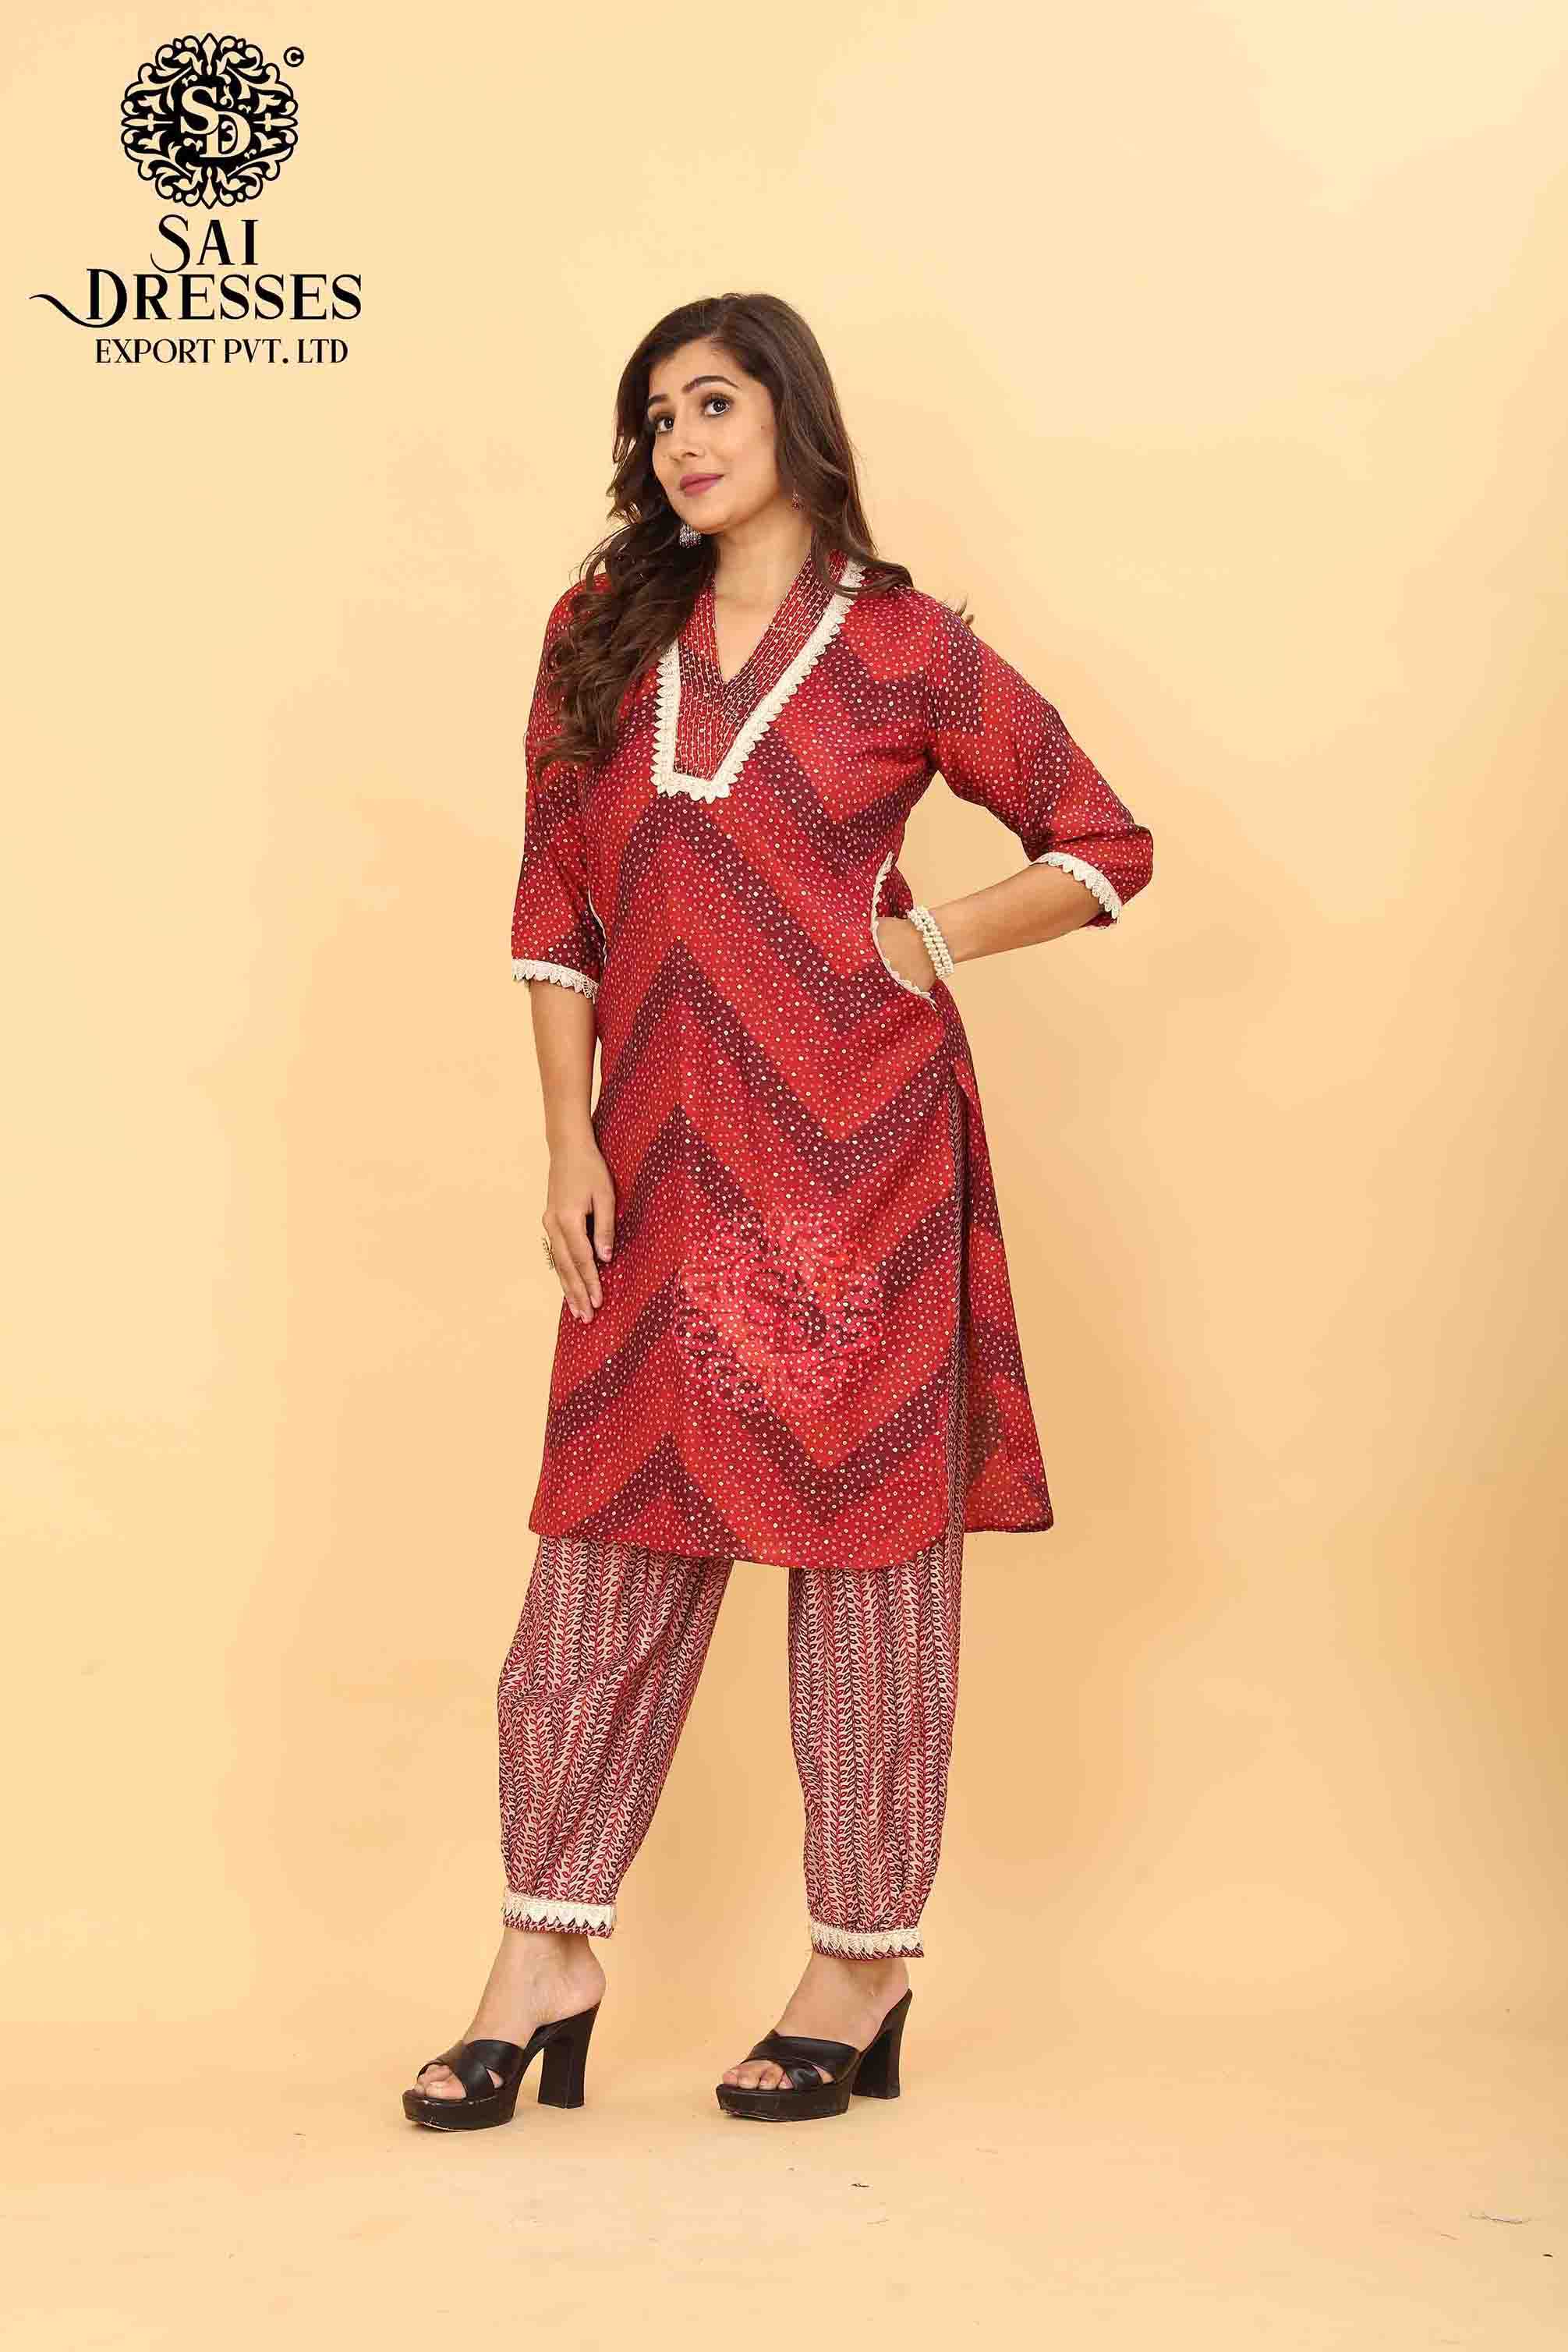 SAI DRESSES PRESENT D.NO SD 5021 READY TO EXCLUSIVE TRENDY WEAR PATHANI KURTA WITH AFGHANI PANT STYLE COMBO COLLECTION IN WHOLESALE RATE IN SURAT